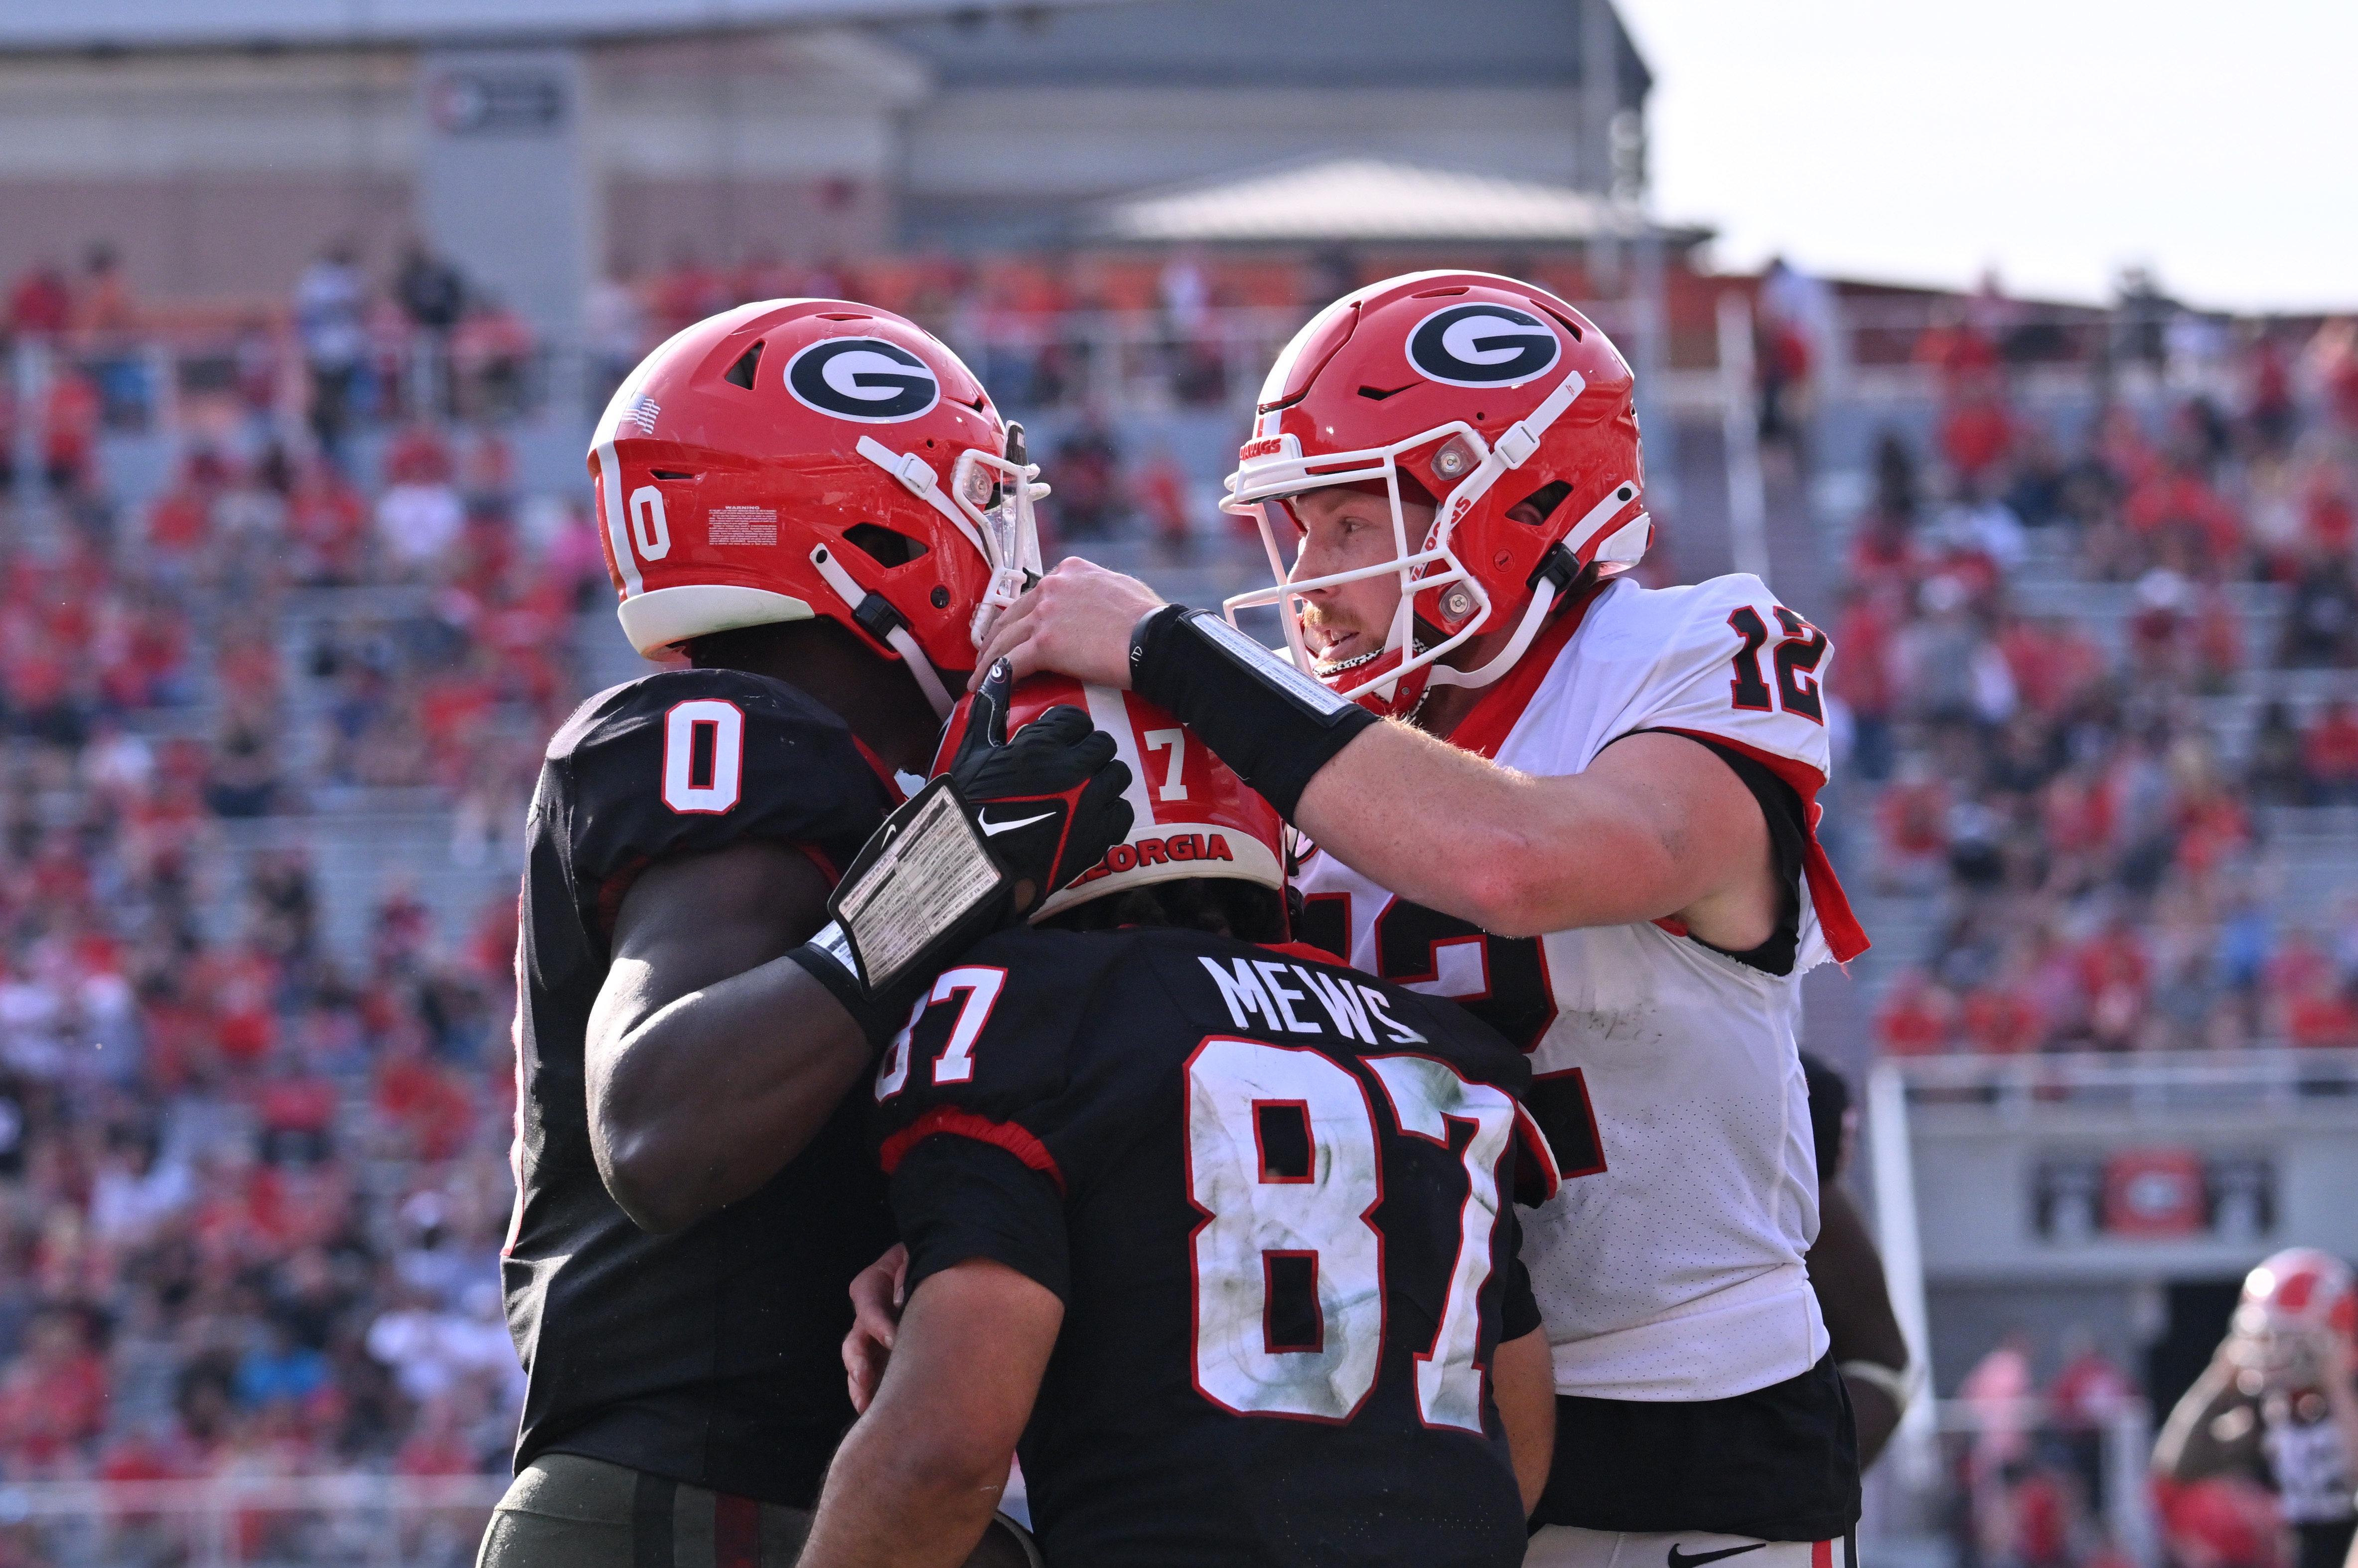 UGA's Kirby Smart weighs in on spring games against different programs